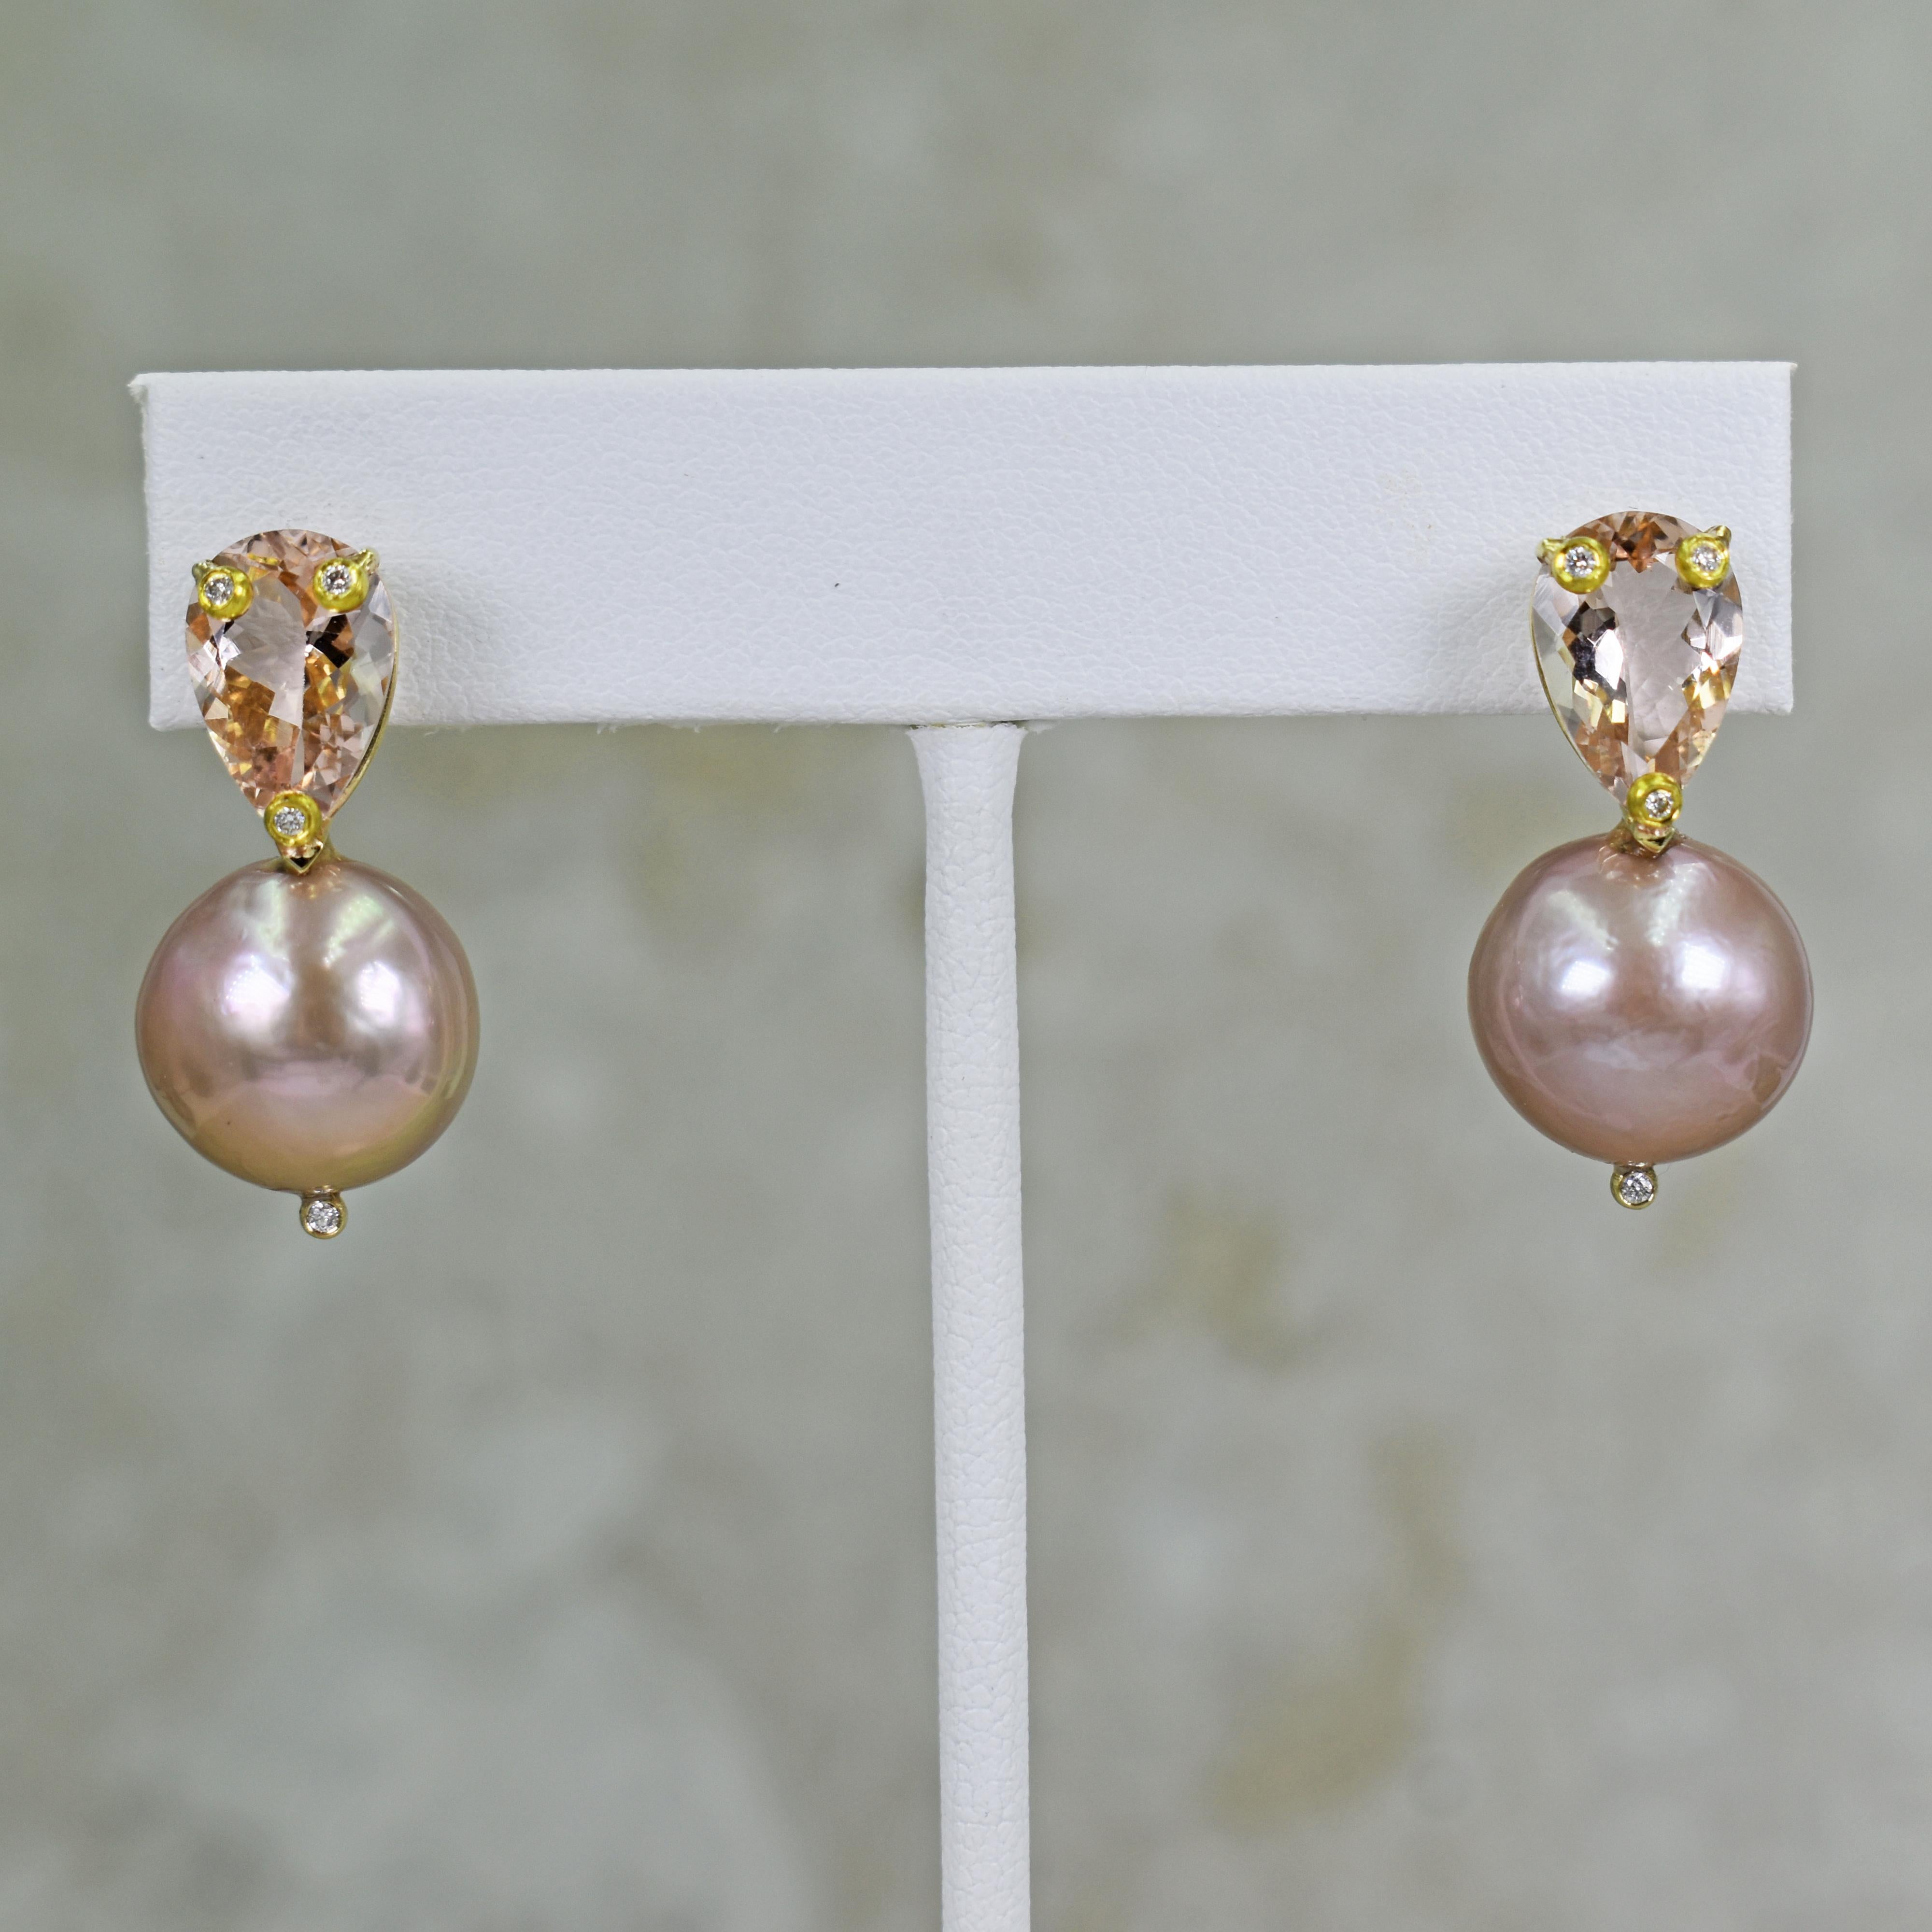 4.78 total carat pear shaped Morganite, accent Diamond and round, freshwater pink Pearl 14k yellow gold stud drop earrings. Stud earrings are 1.07 inches in length. 